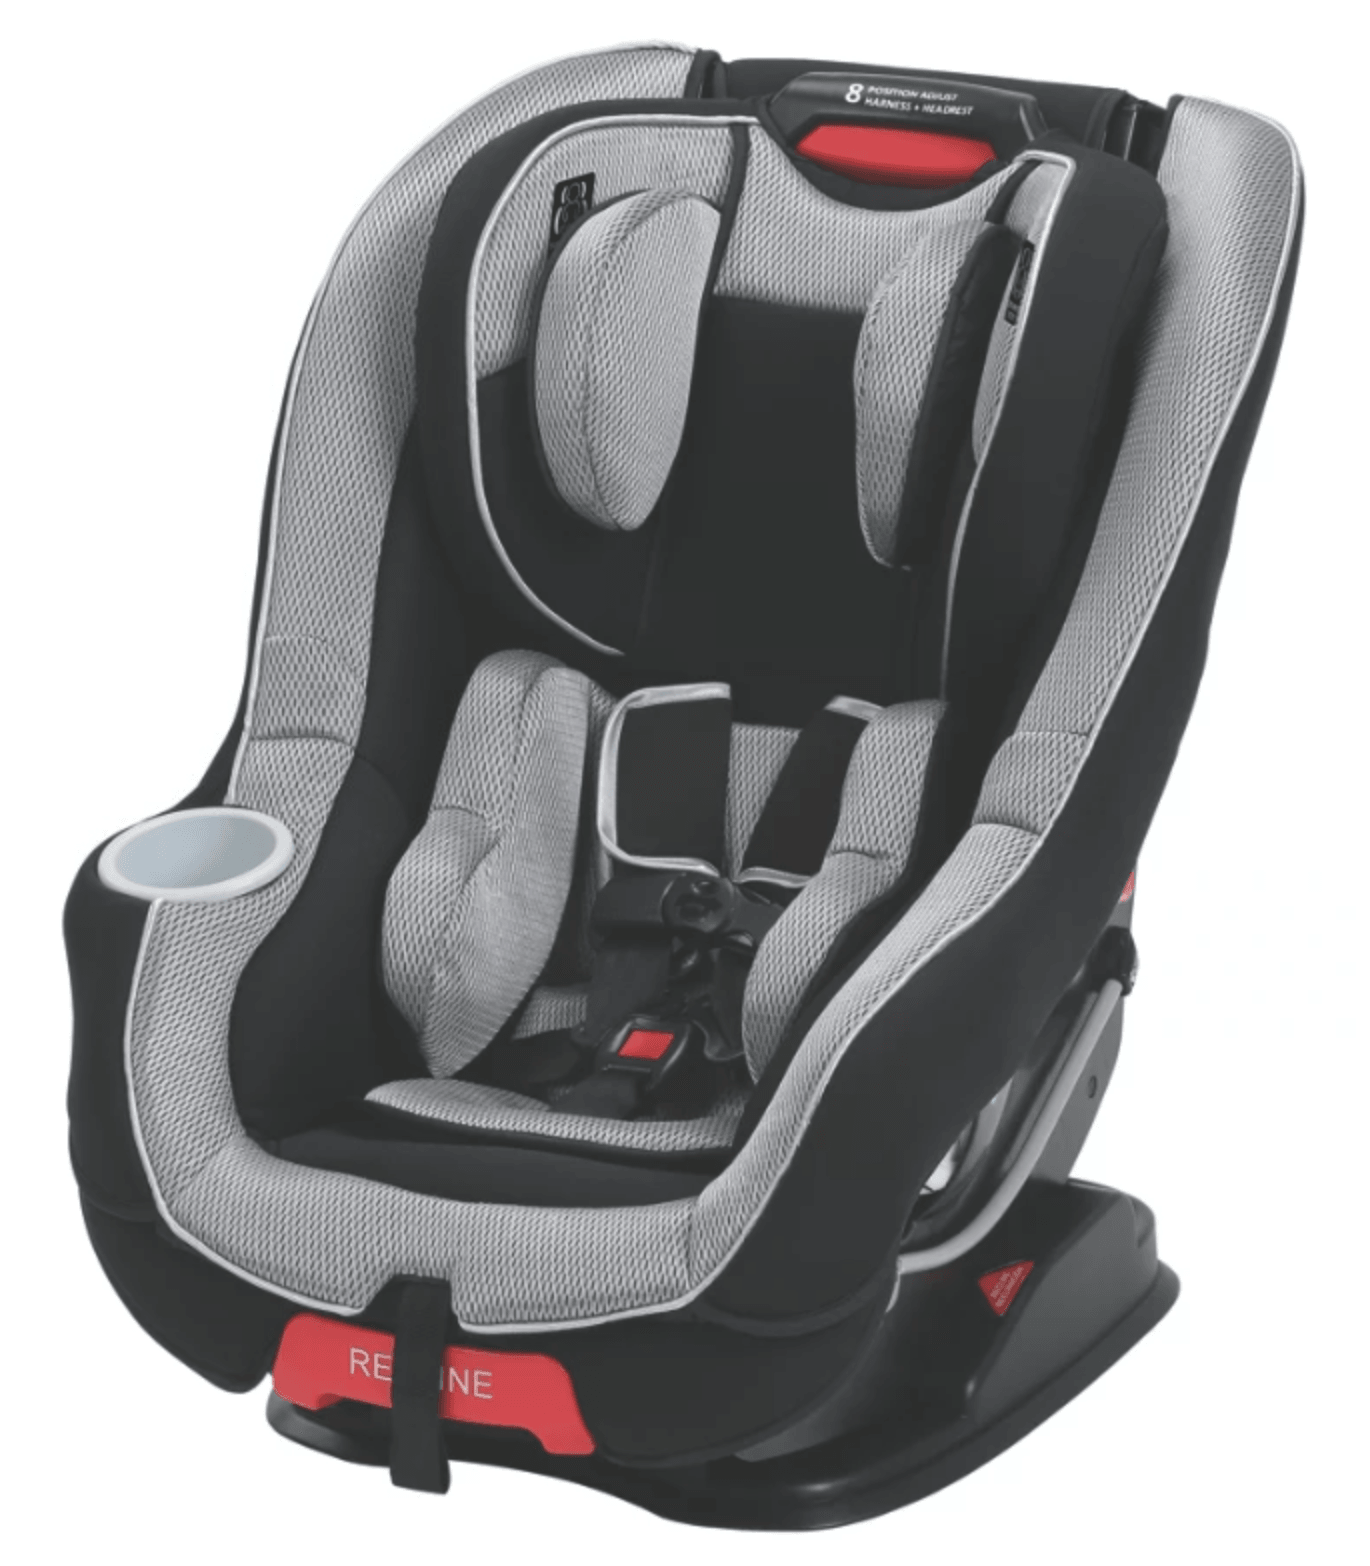 Size4Me™ 65 Rapid Remove Convertible Car Seat - The Baby's Room